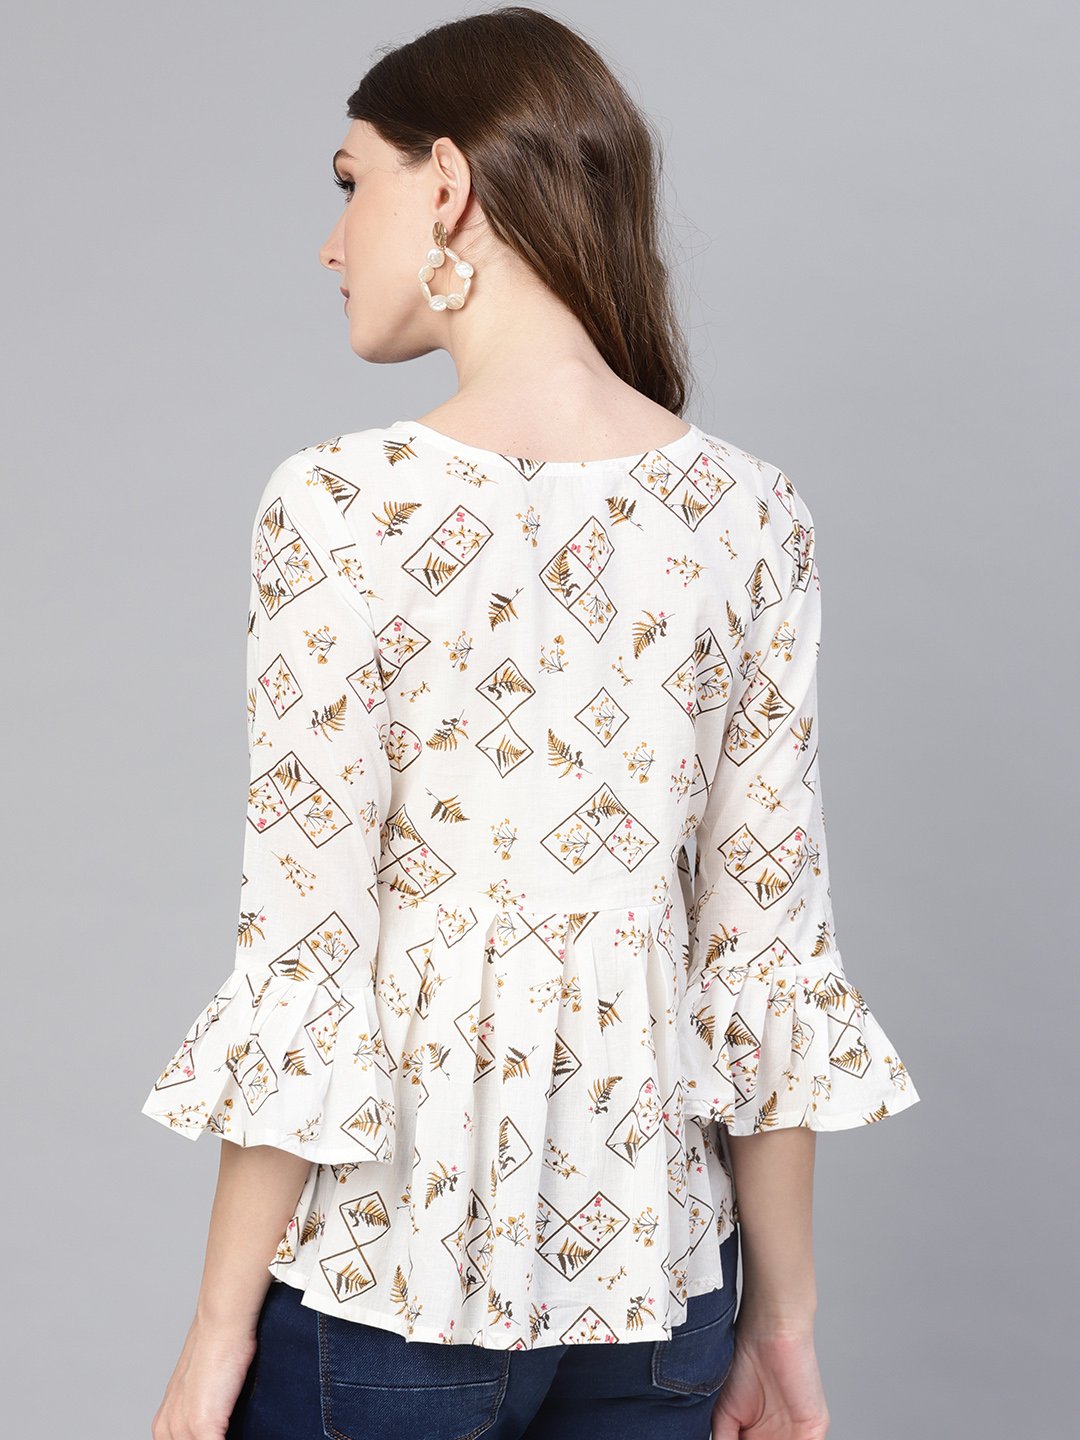 Women's White & Brown Printed A-Line Top - Nayo Clothing